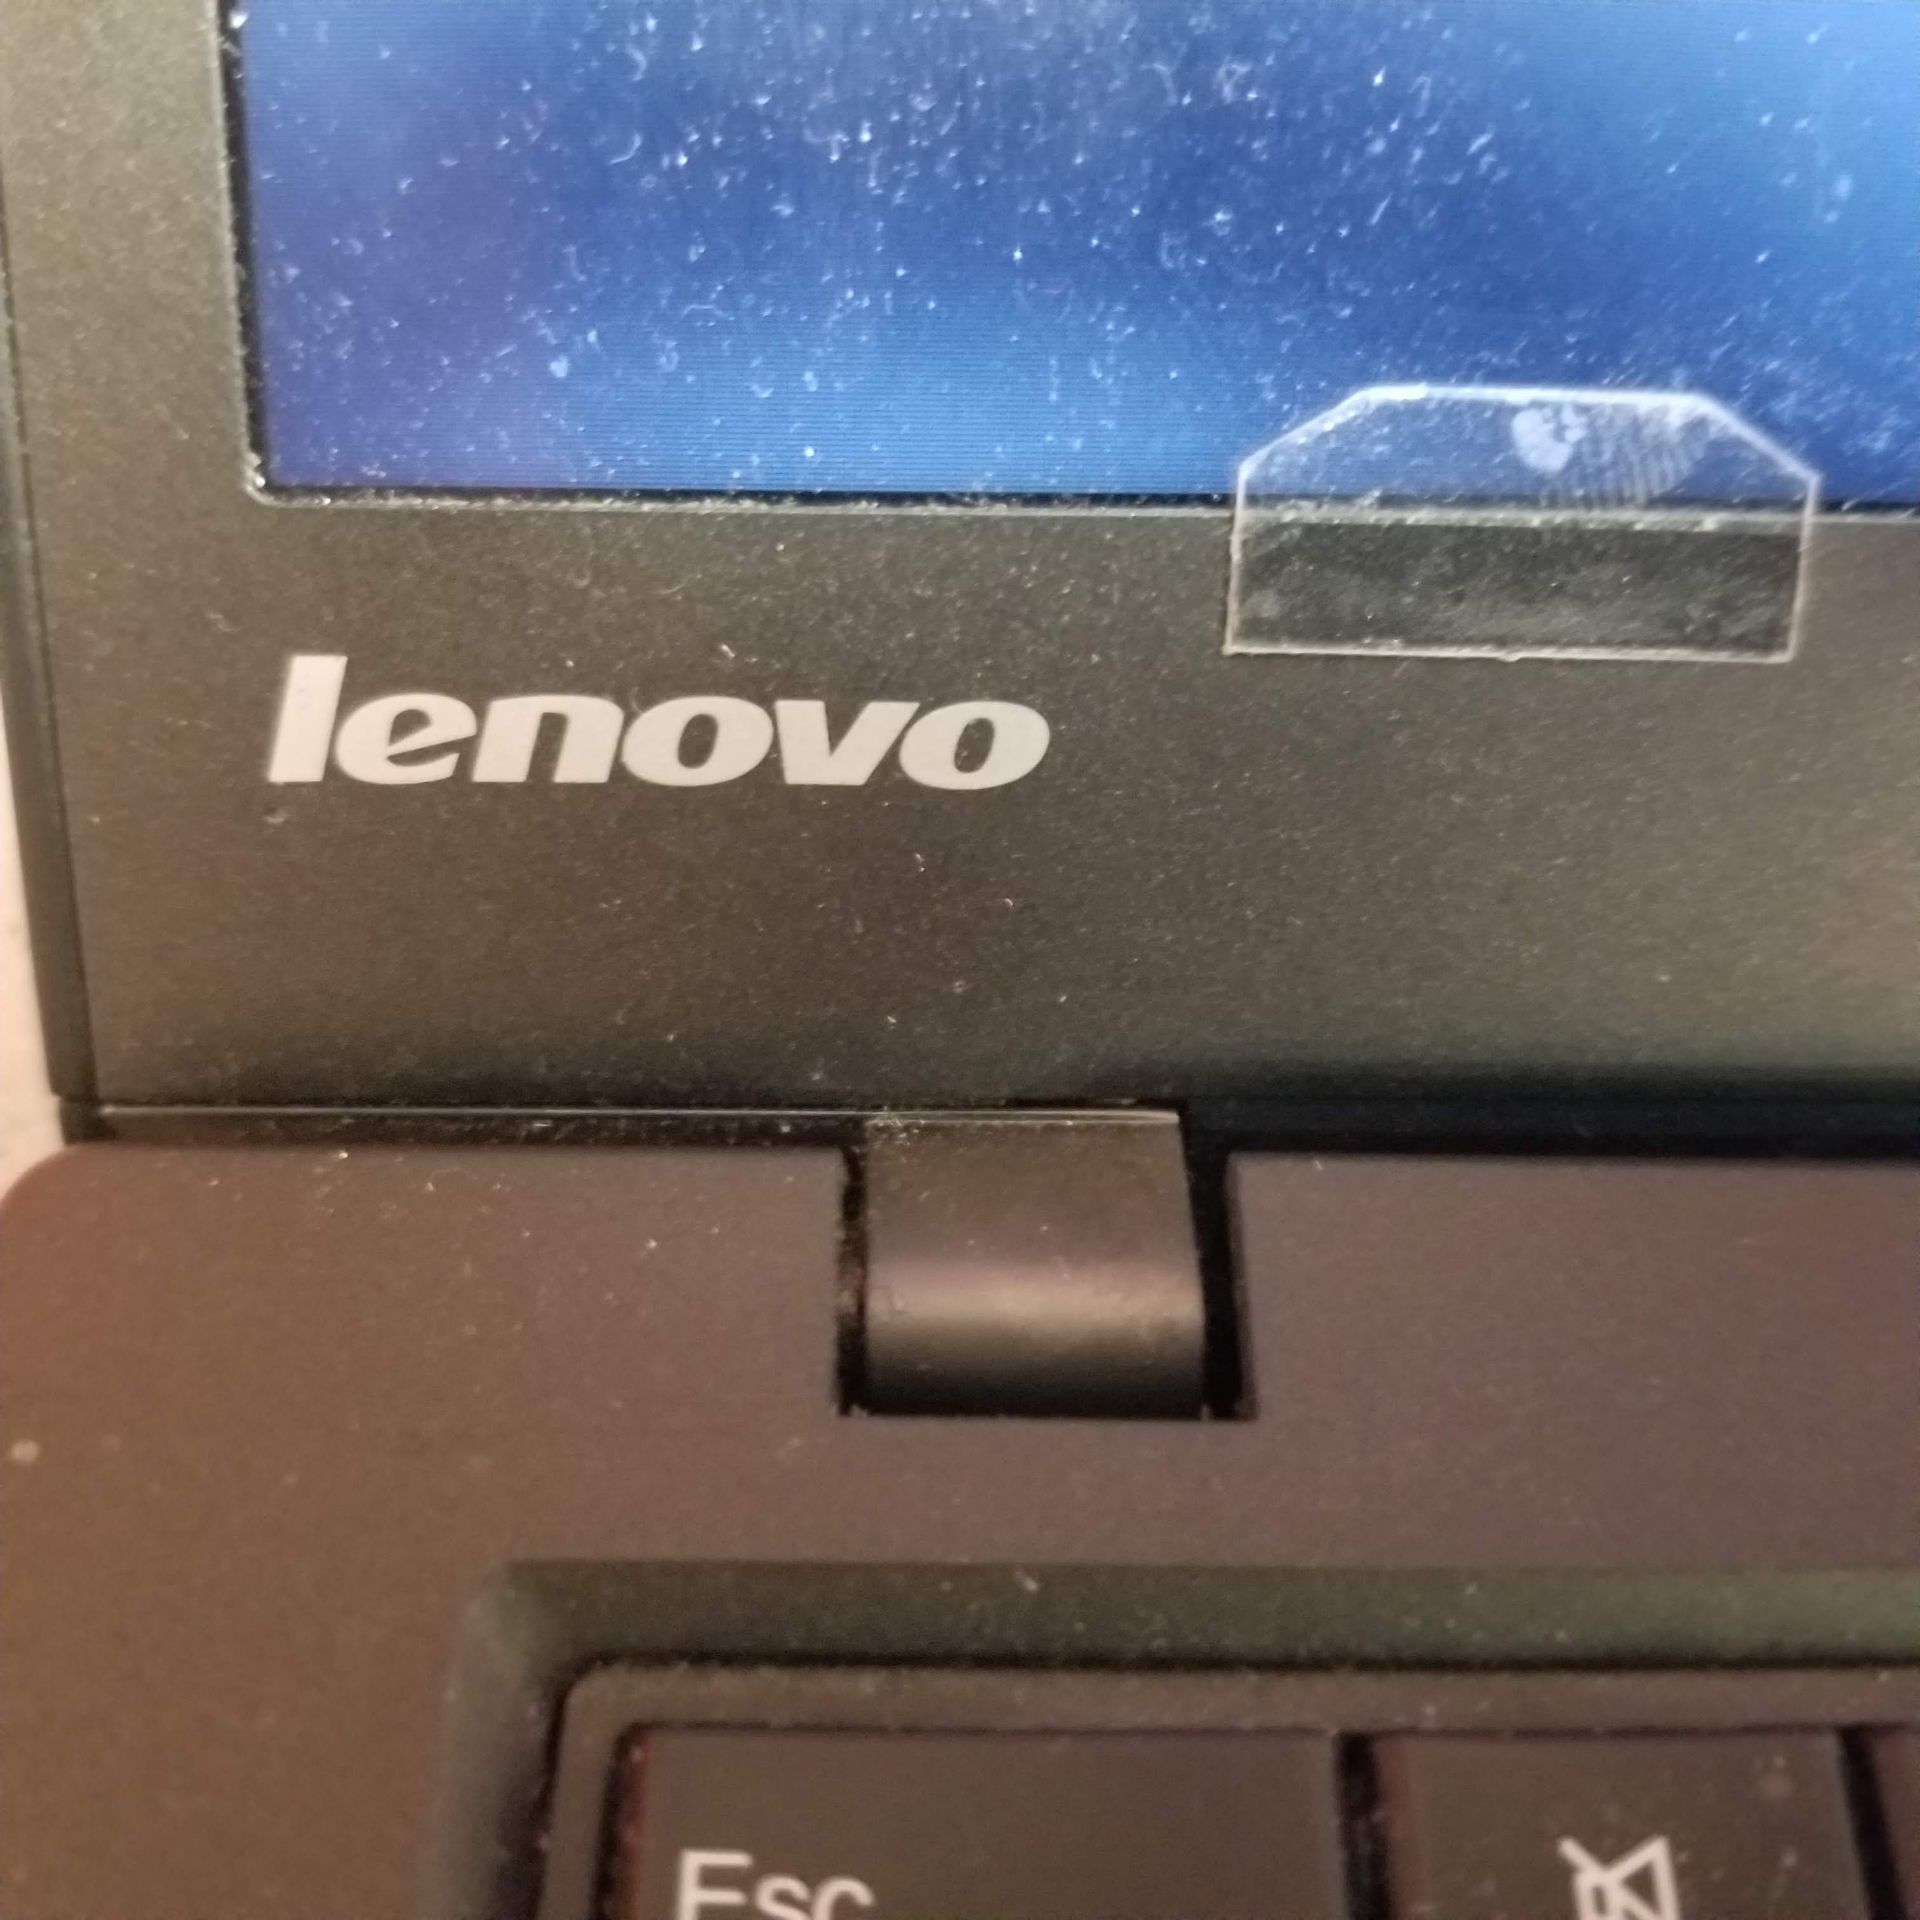 LENOVO - T440s CORE i5 ('AS-IS') - Image 3 of 6